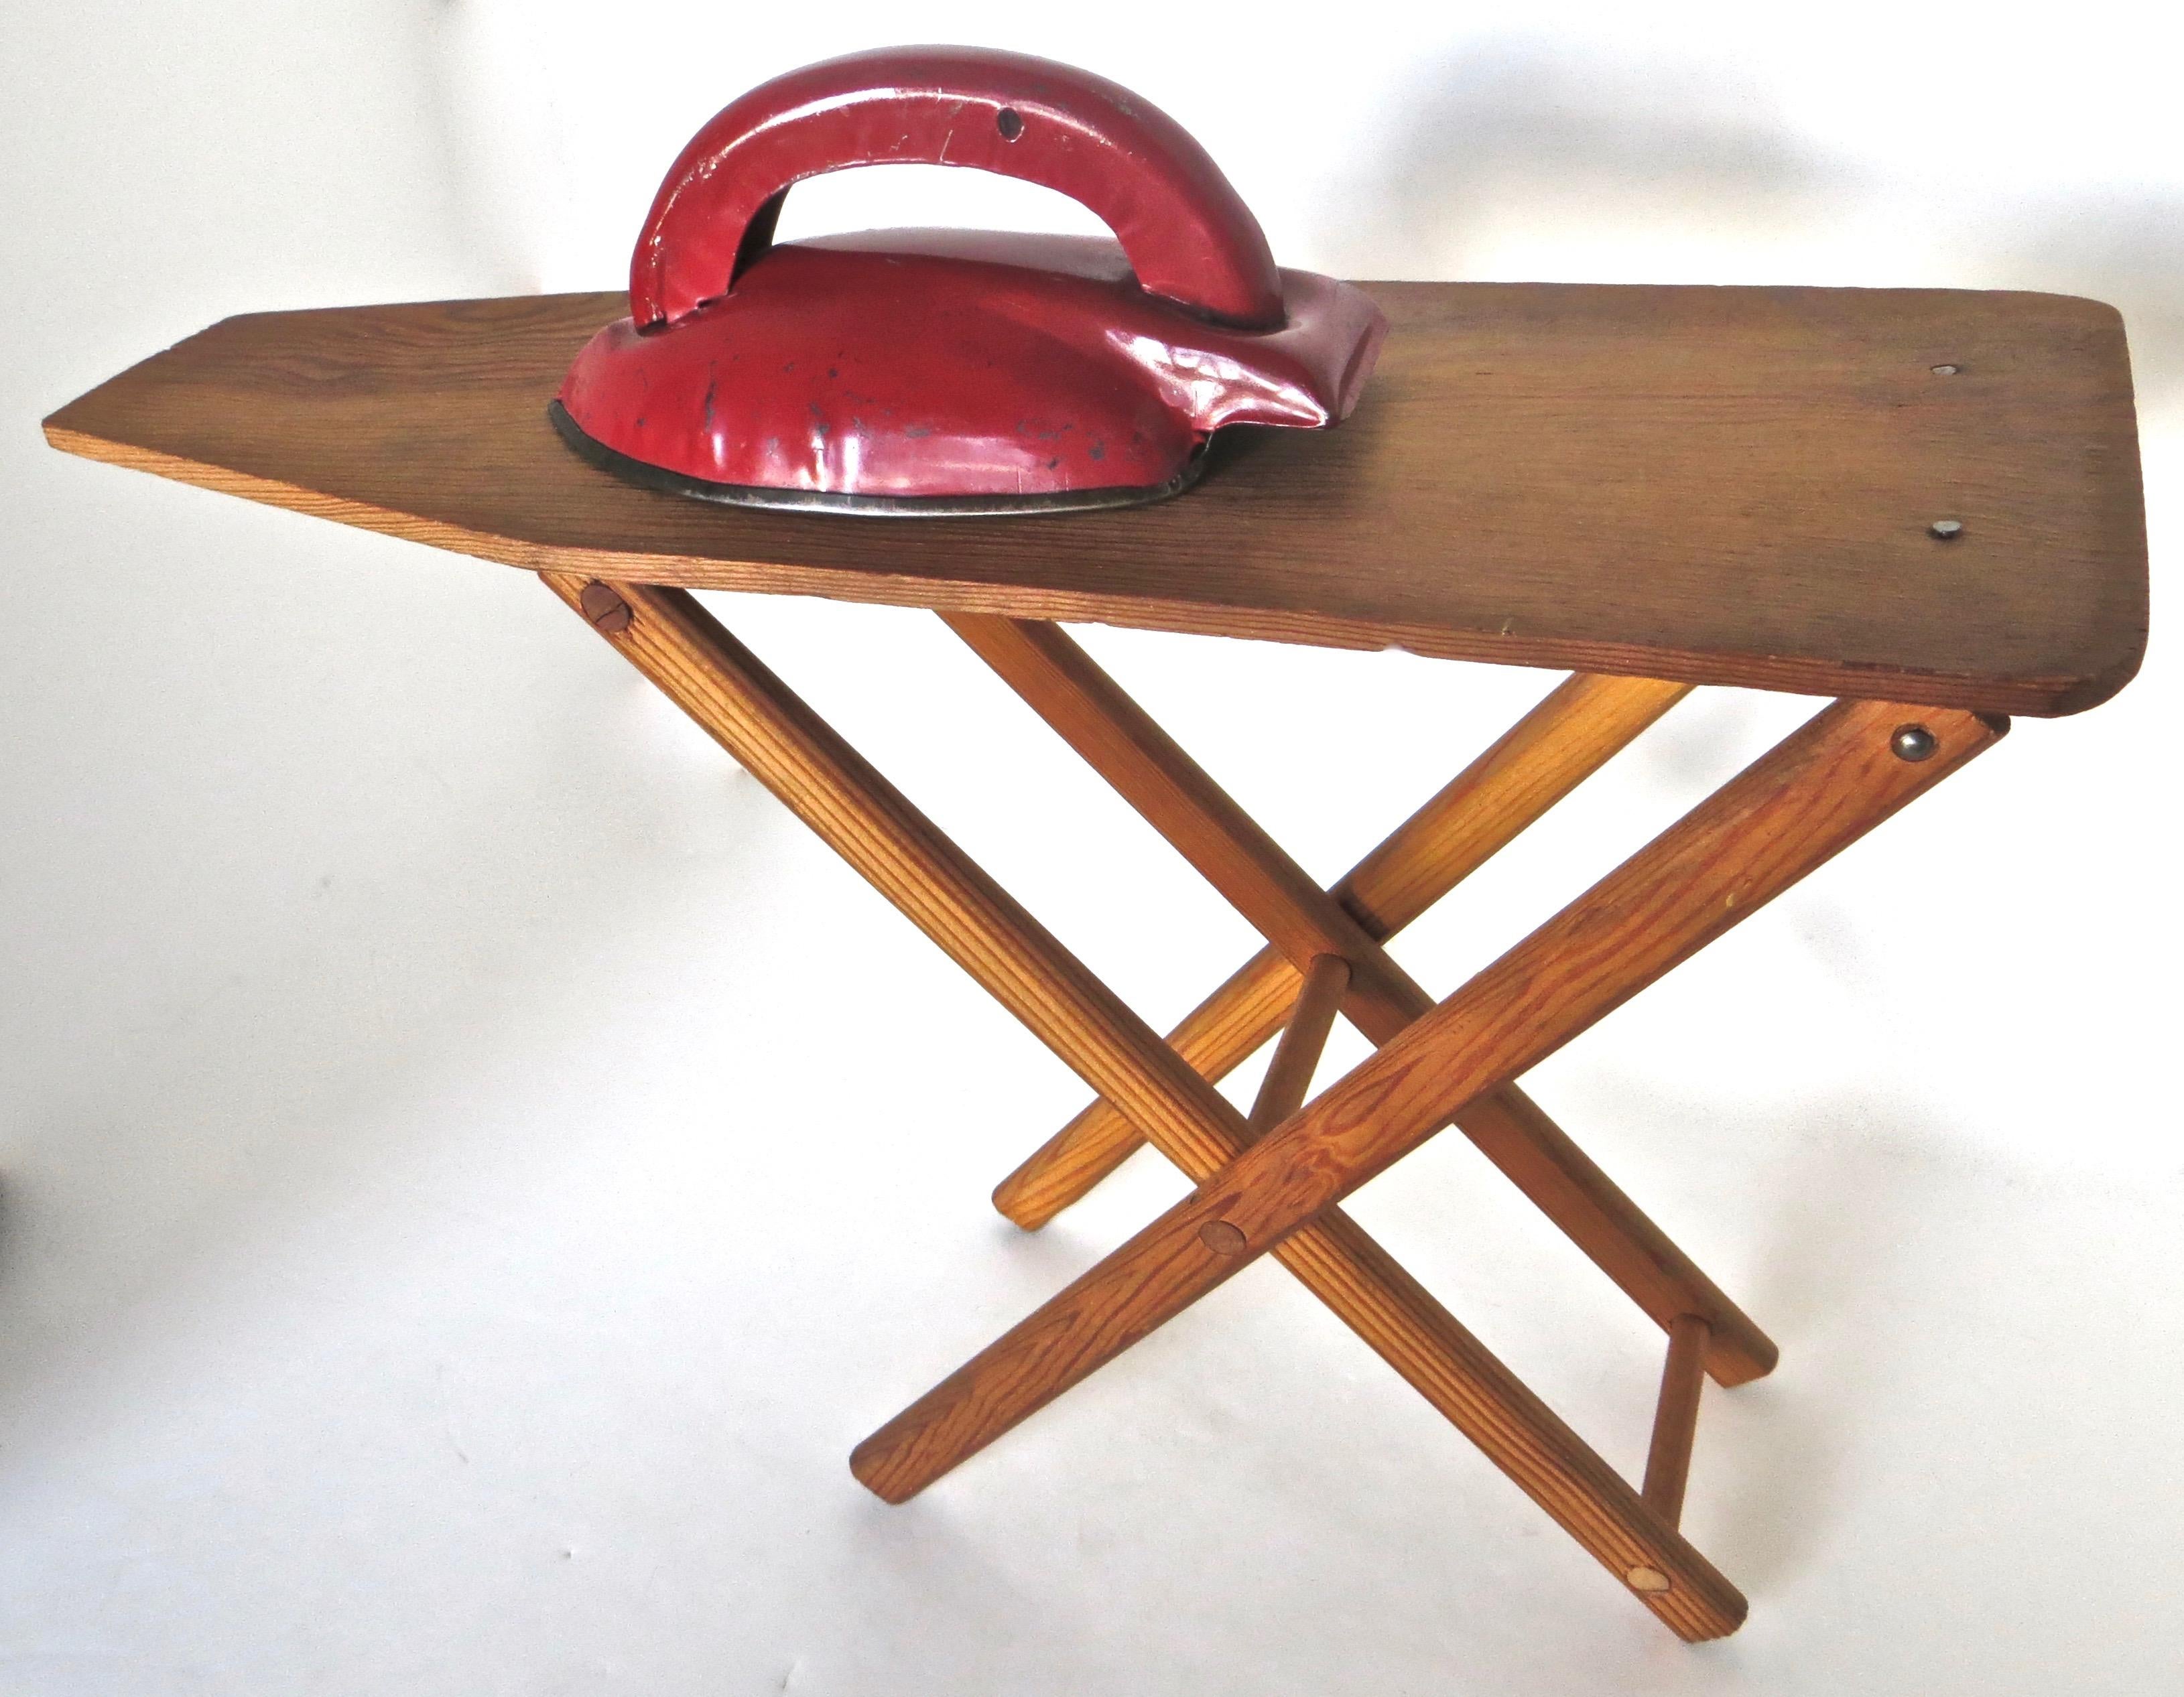 Salesman sample circa 1920 miniature ironing board accompanied by a hand painted metal iron, are both handmade and in excellent all original condition with no repairs; the iron is in it's copious original bright red paint with no touch up.